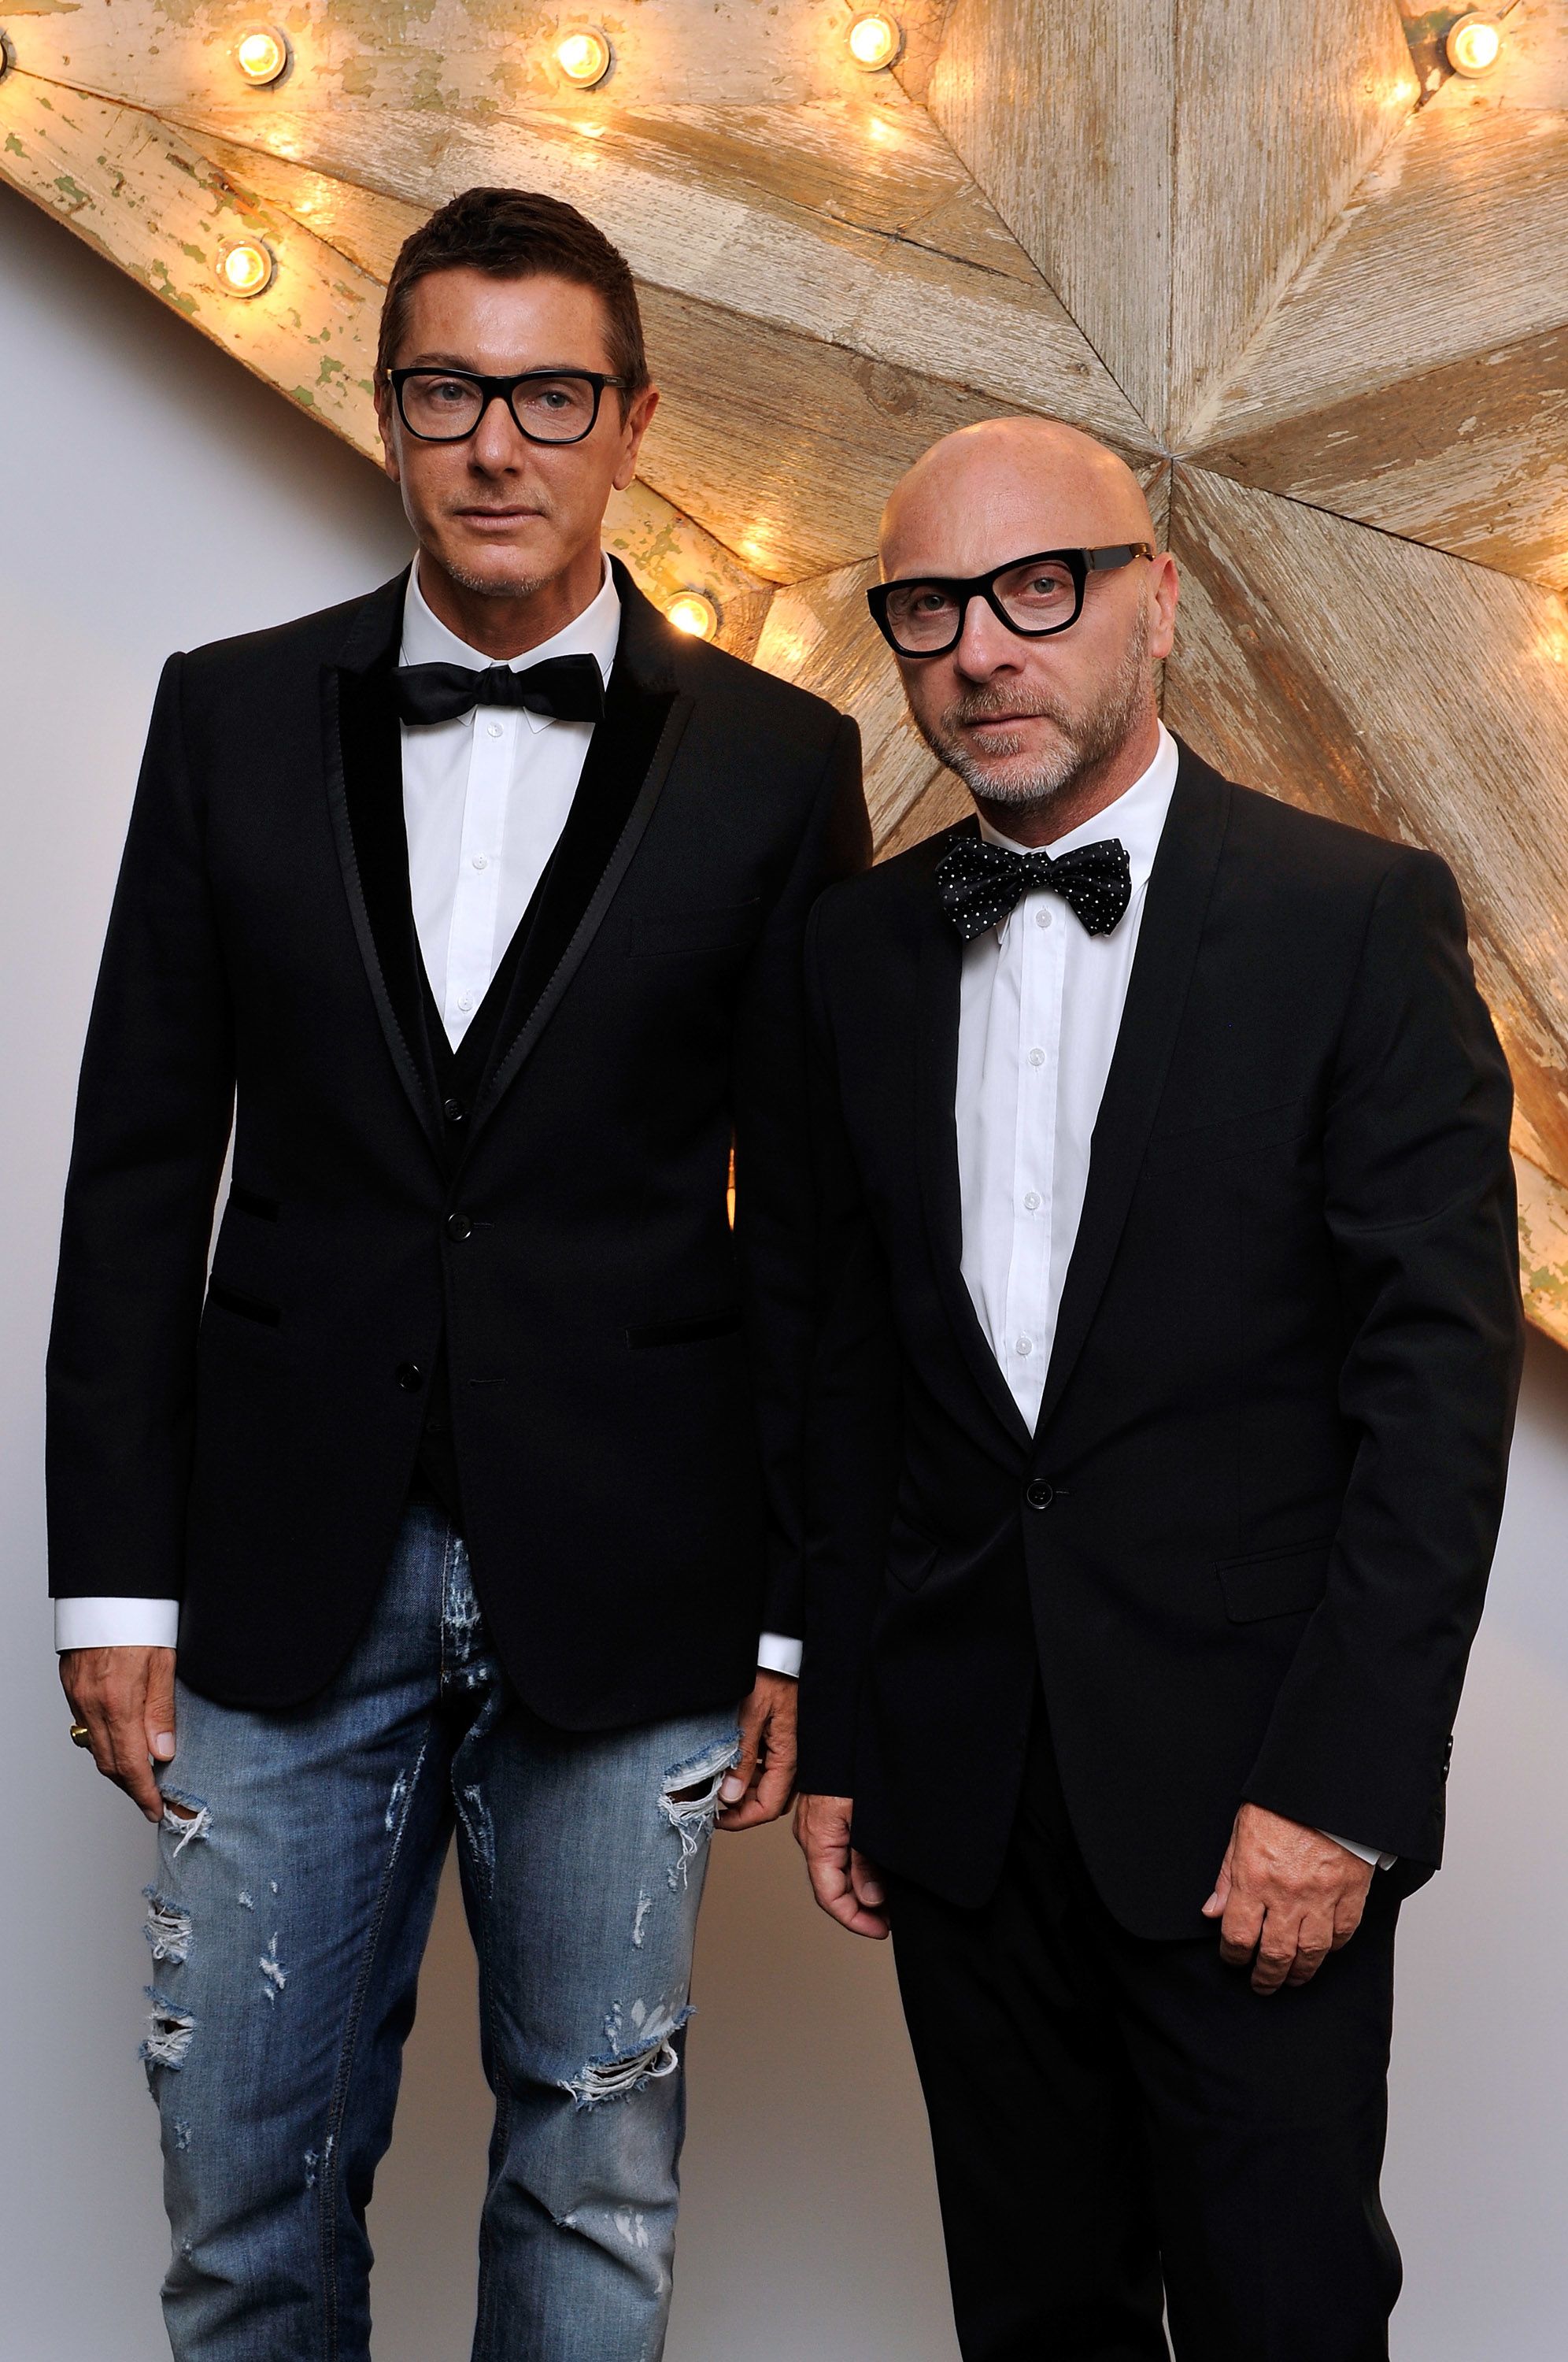 Dolce & Gabbana forced to cancel show in China | CNN